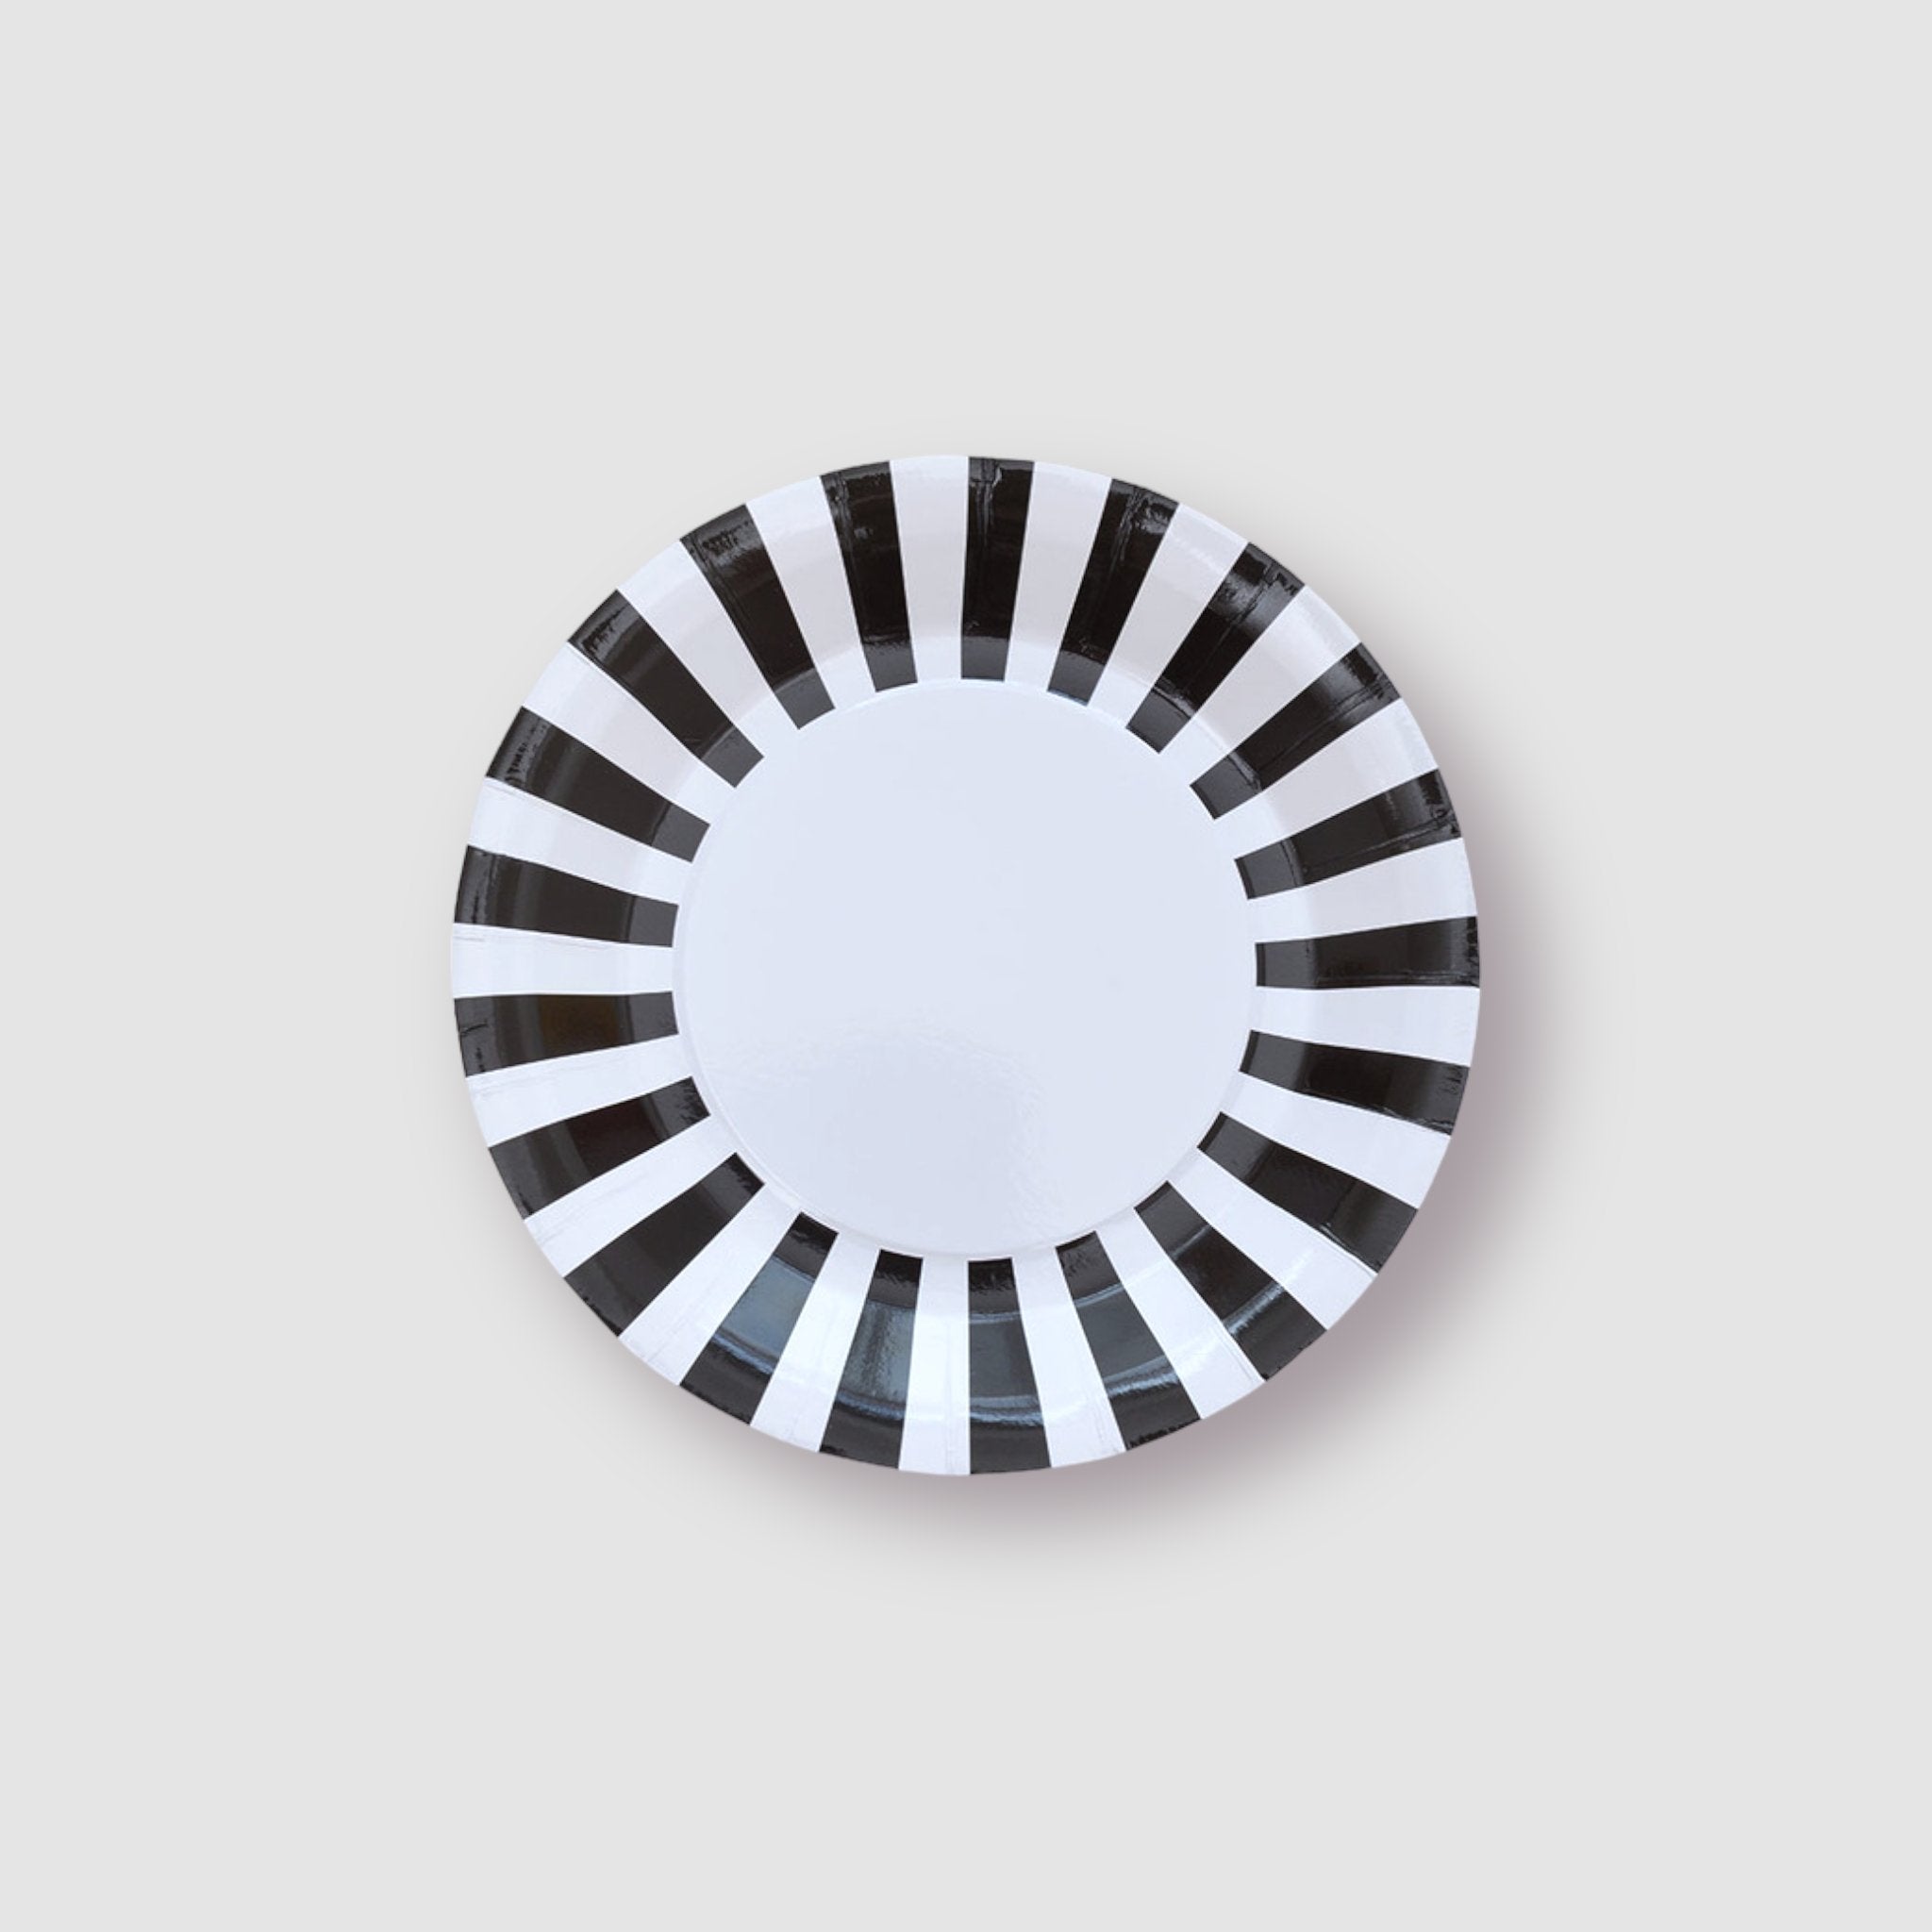 12 Black Stripe Paper Party Cake Plates (9 inch) - Cook and Party